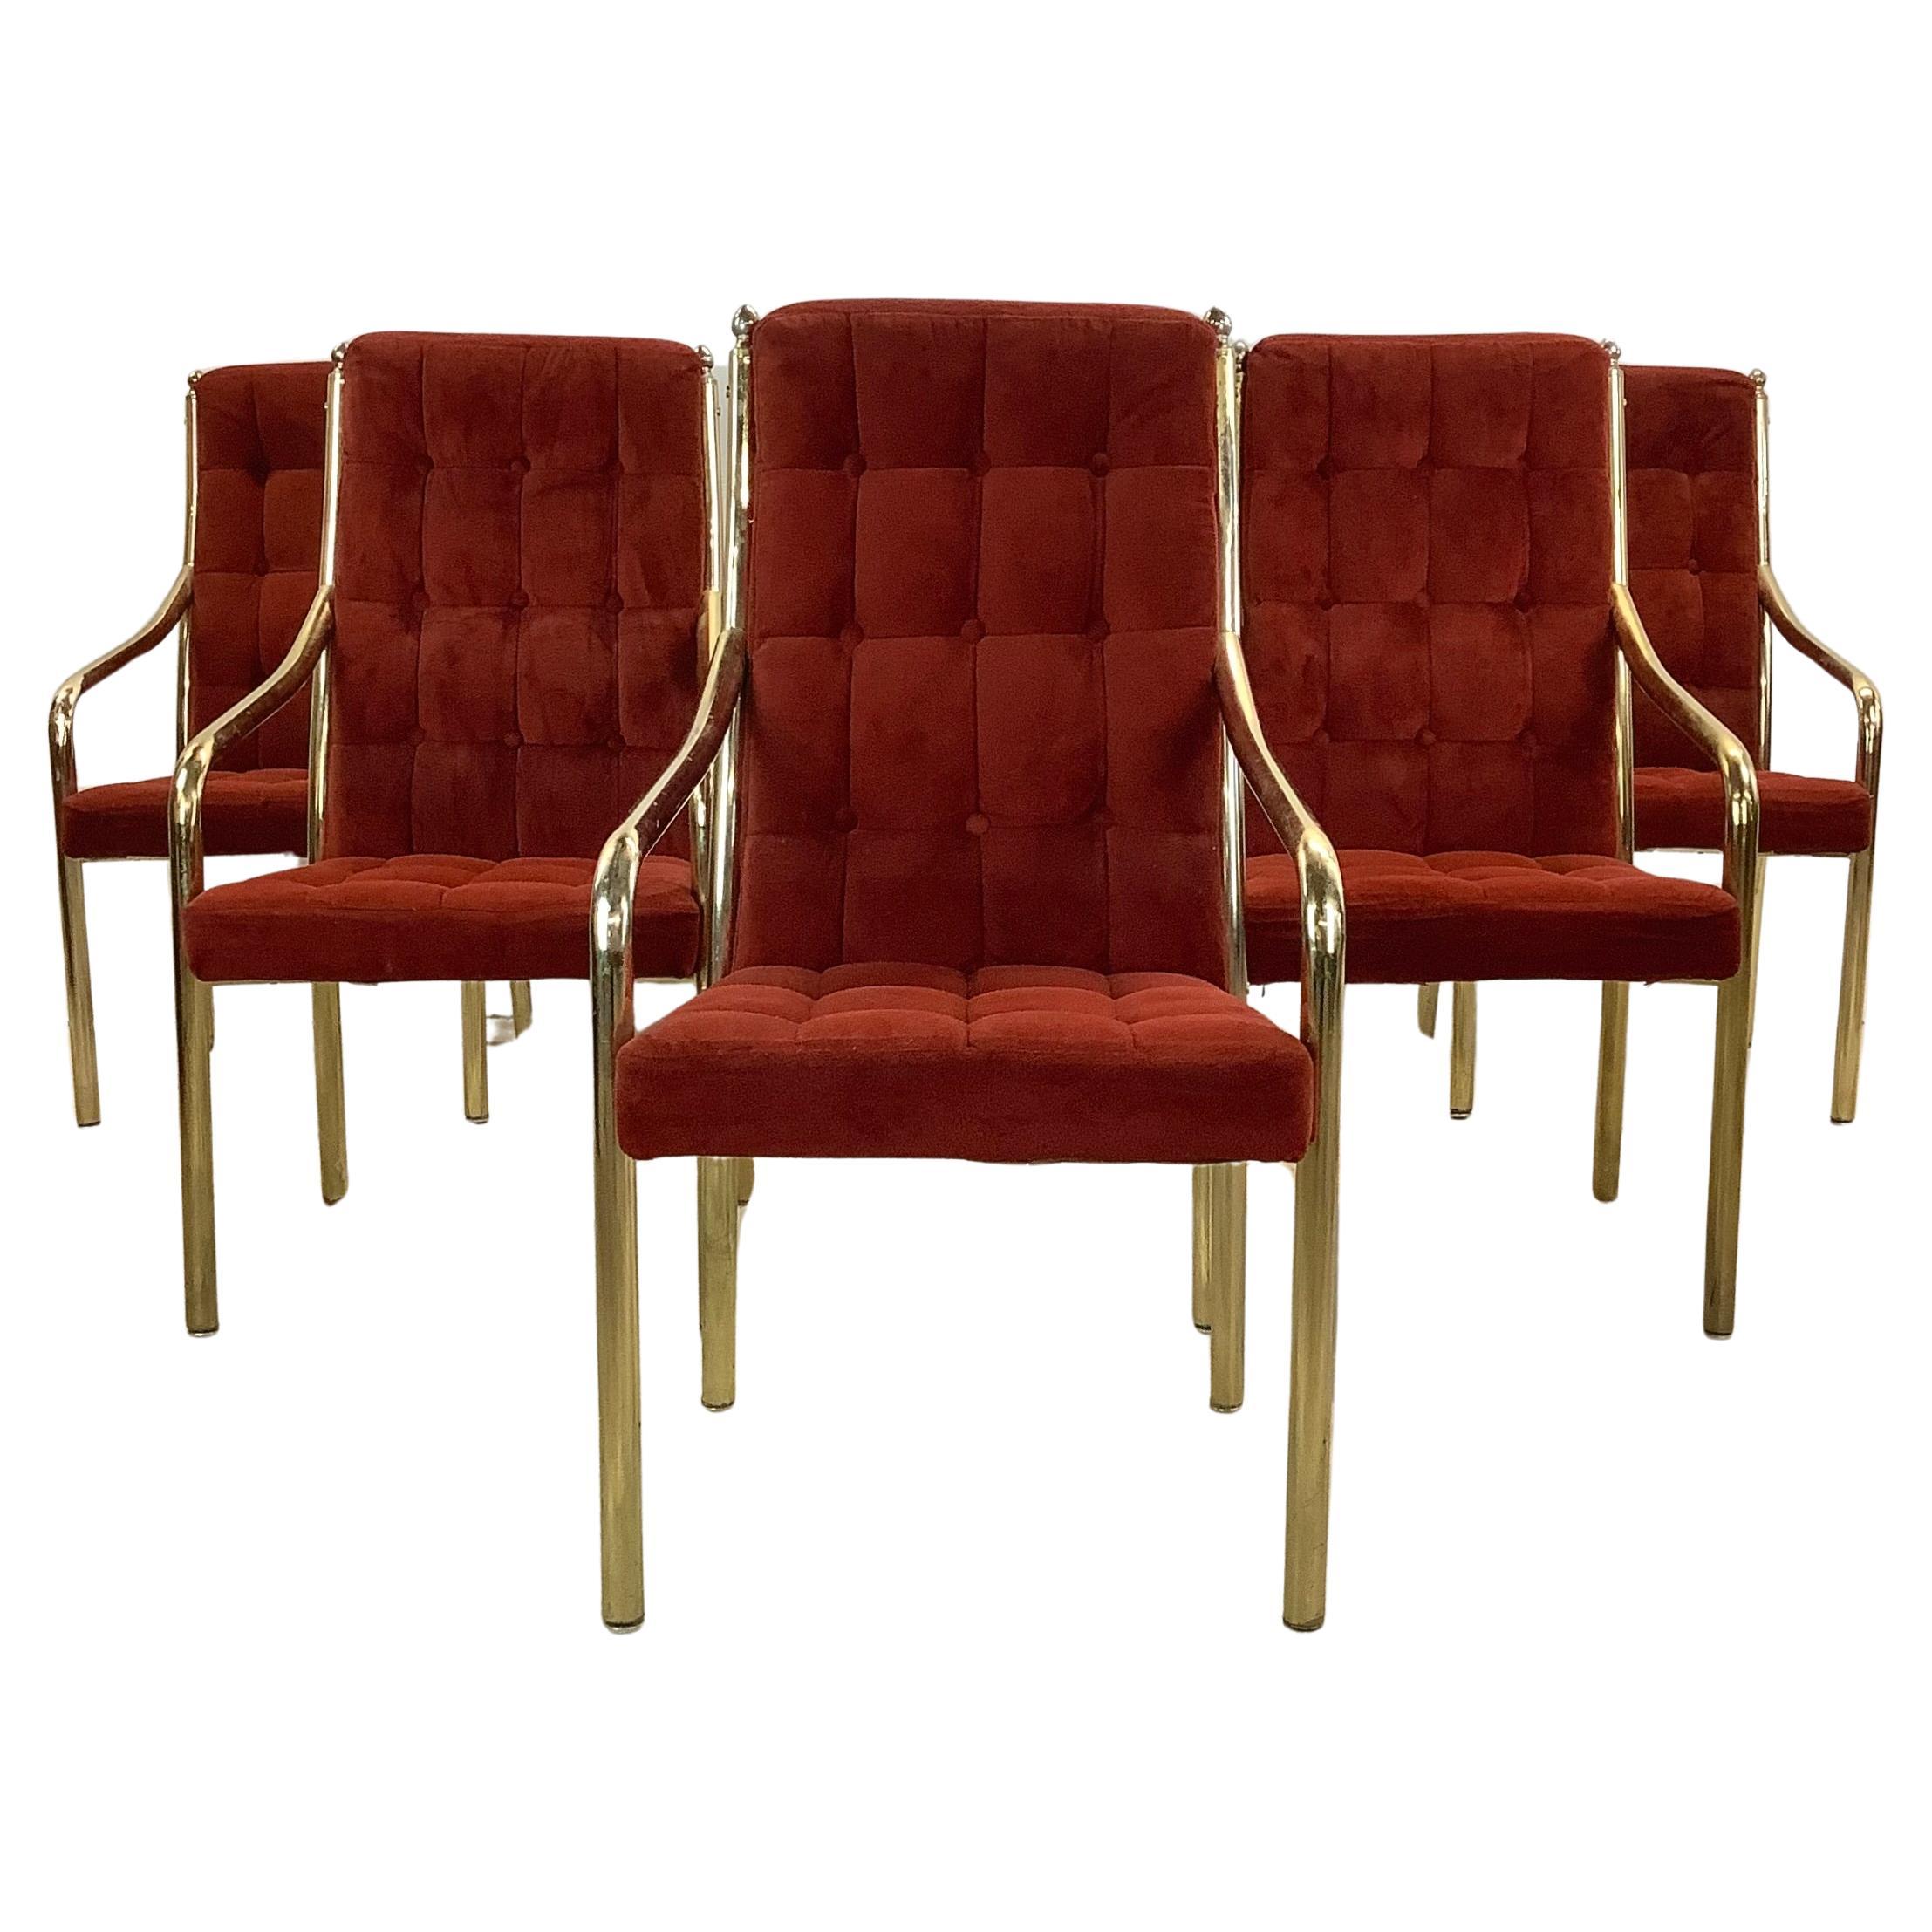 Vintage Modern Highback Dining Chairs by Chromcraft, set of Six For Sale